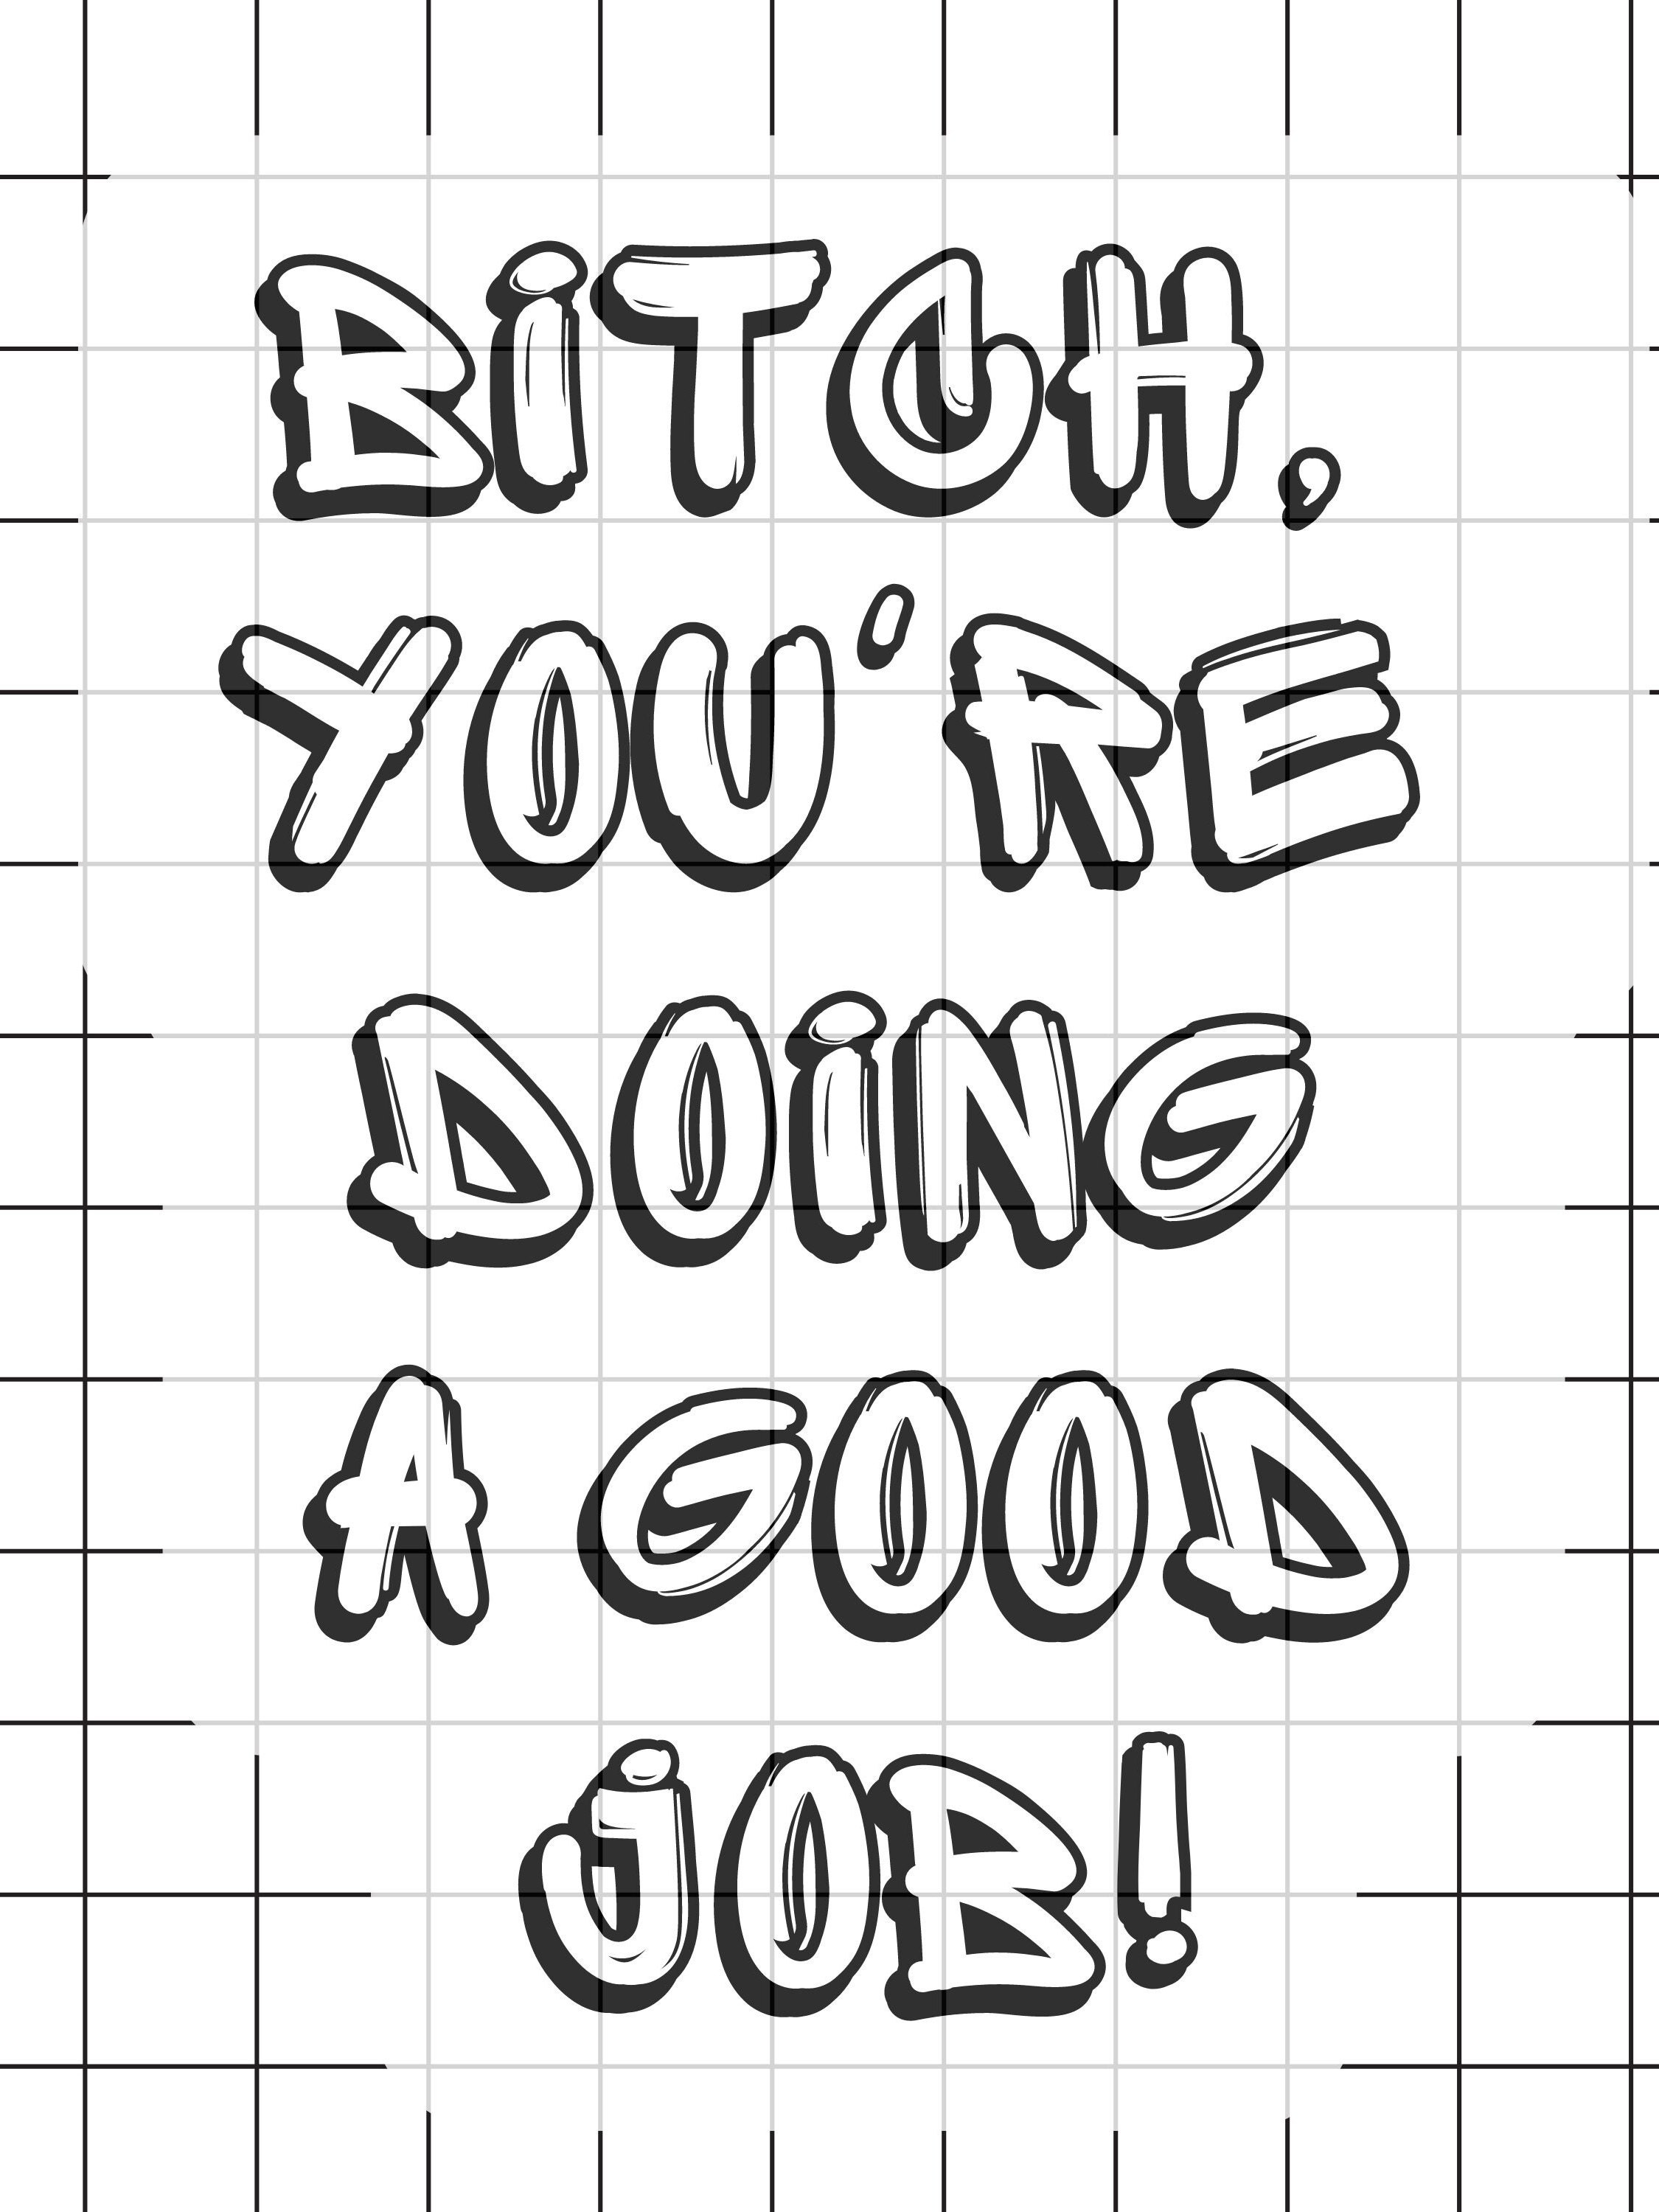 Bitch, You're Doing a Good Job! Coloring Page. This motivational digital  product is designed to uplift and celebrate your accomplishments.